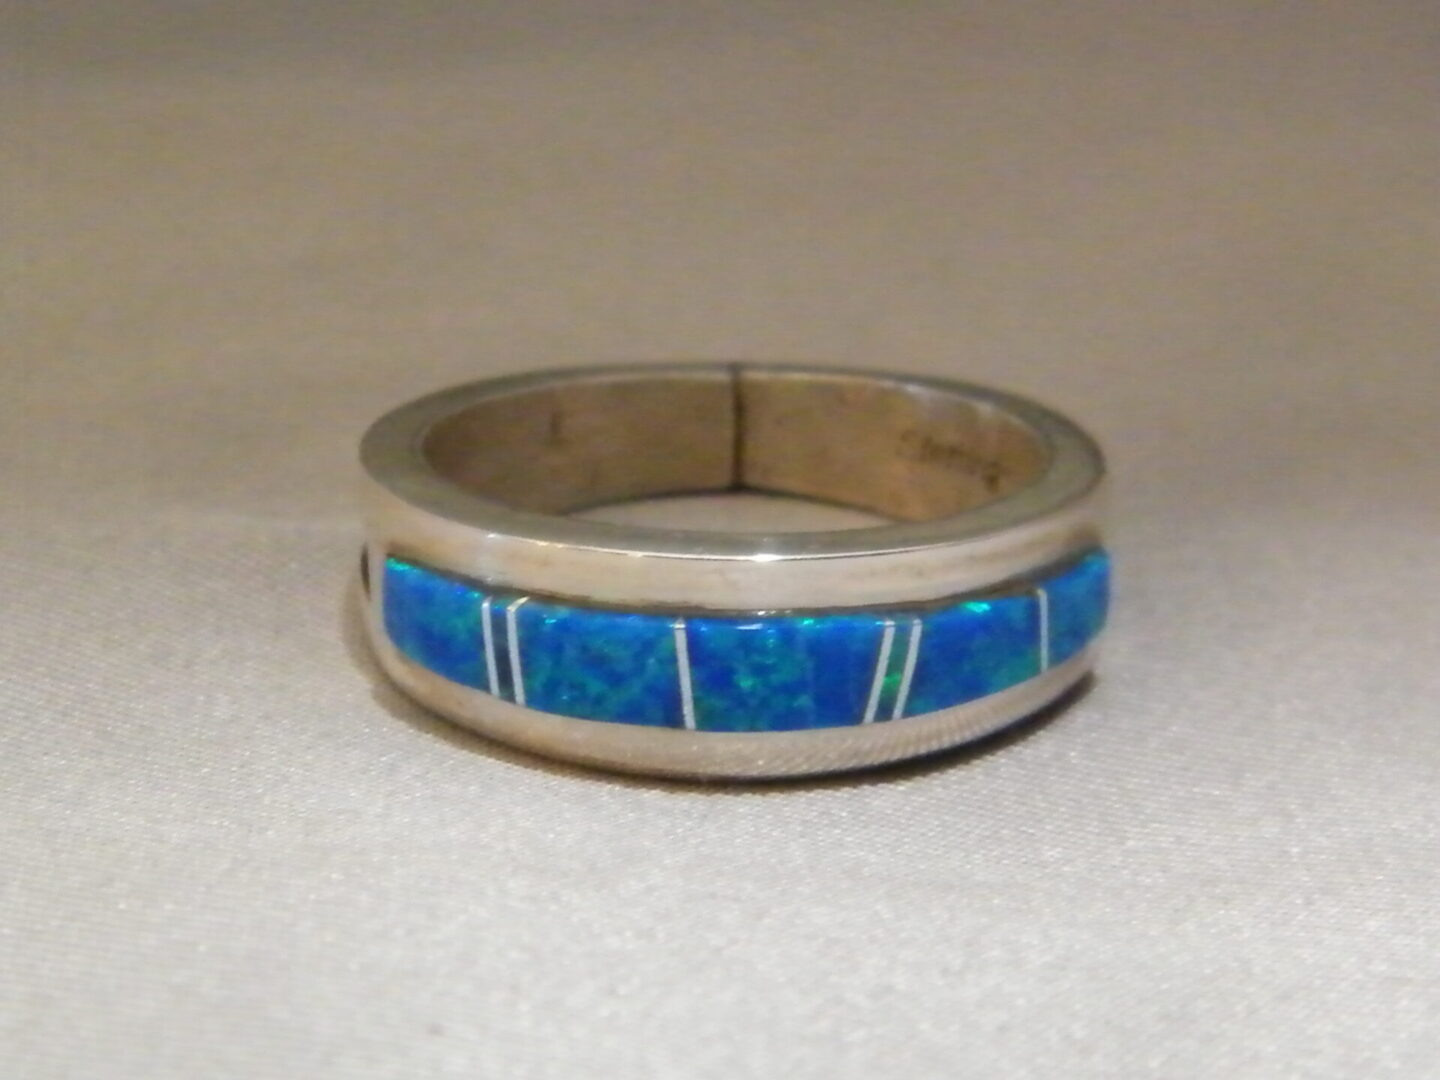 A Silver Ring With Blue Stone and White Lines